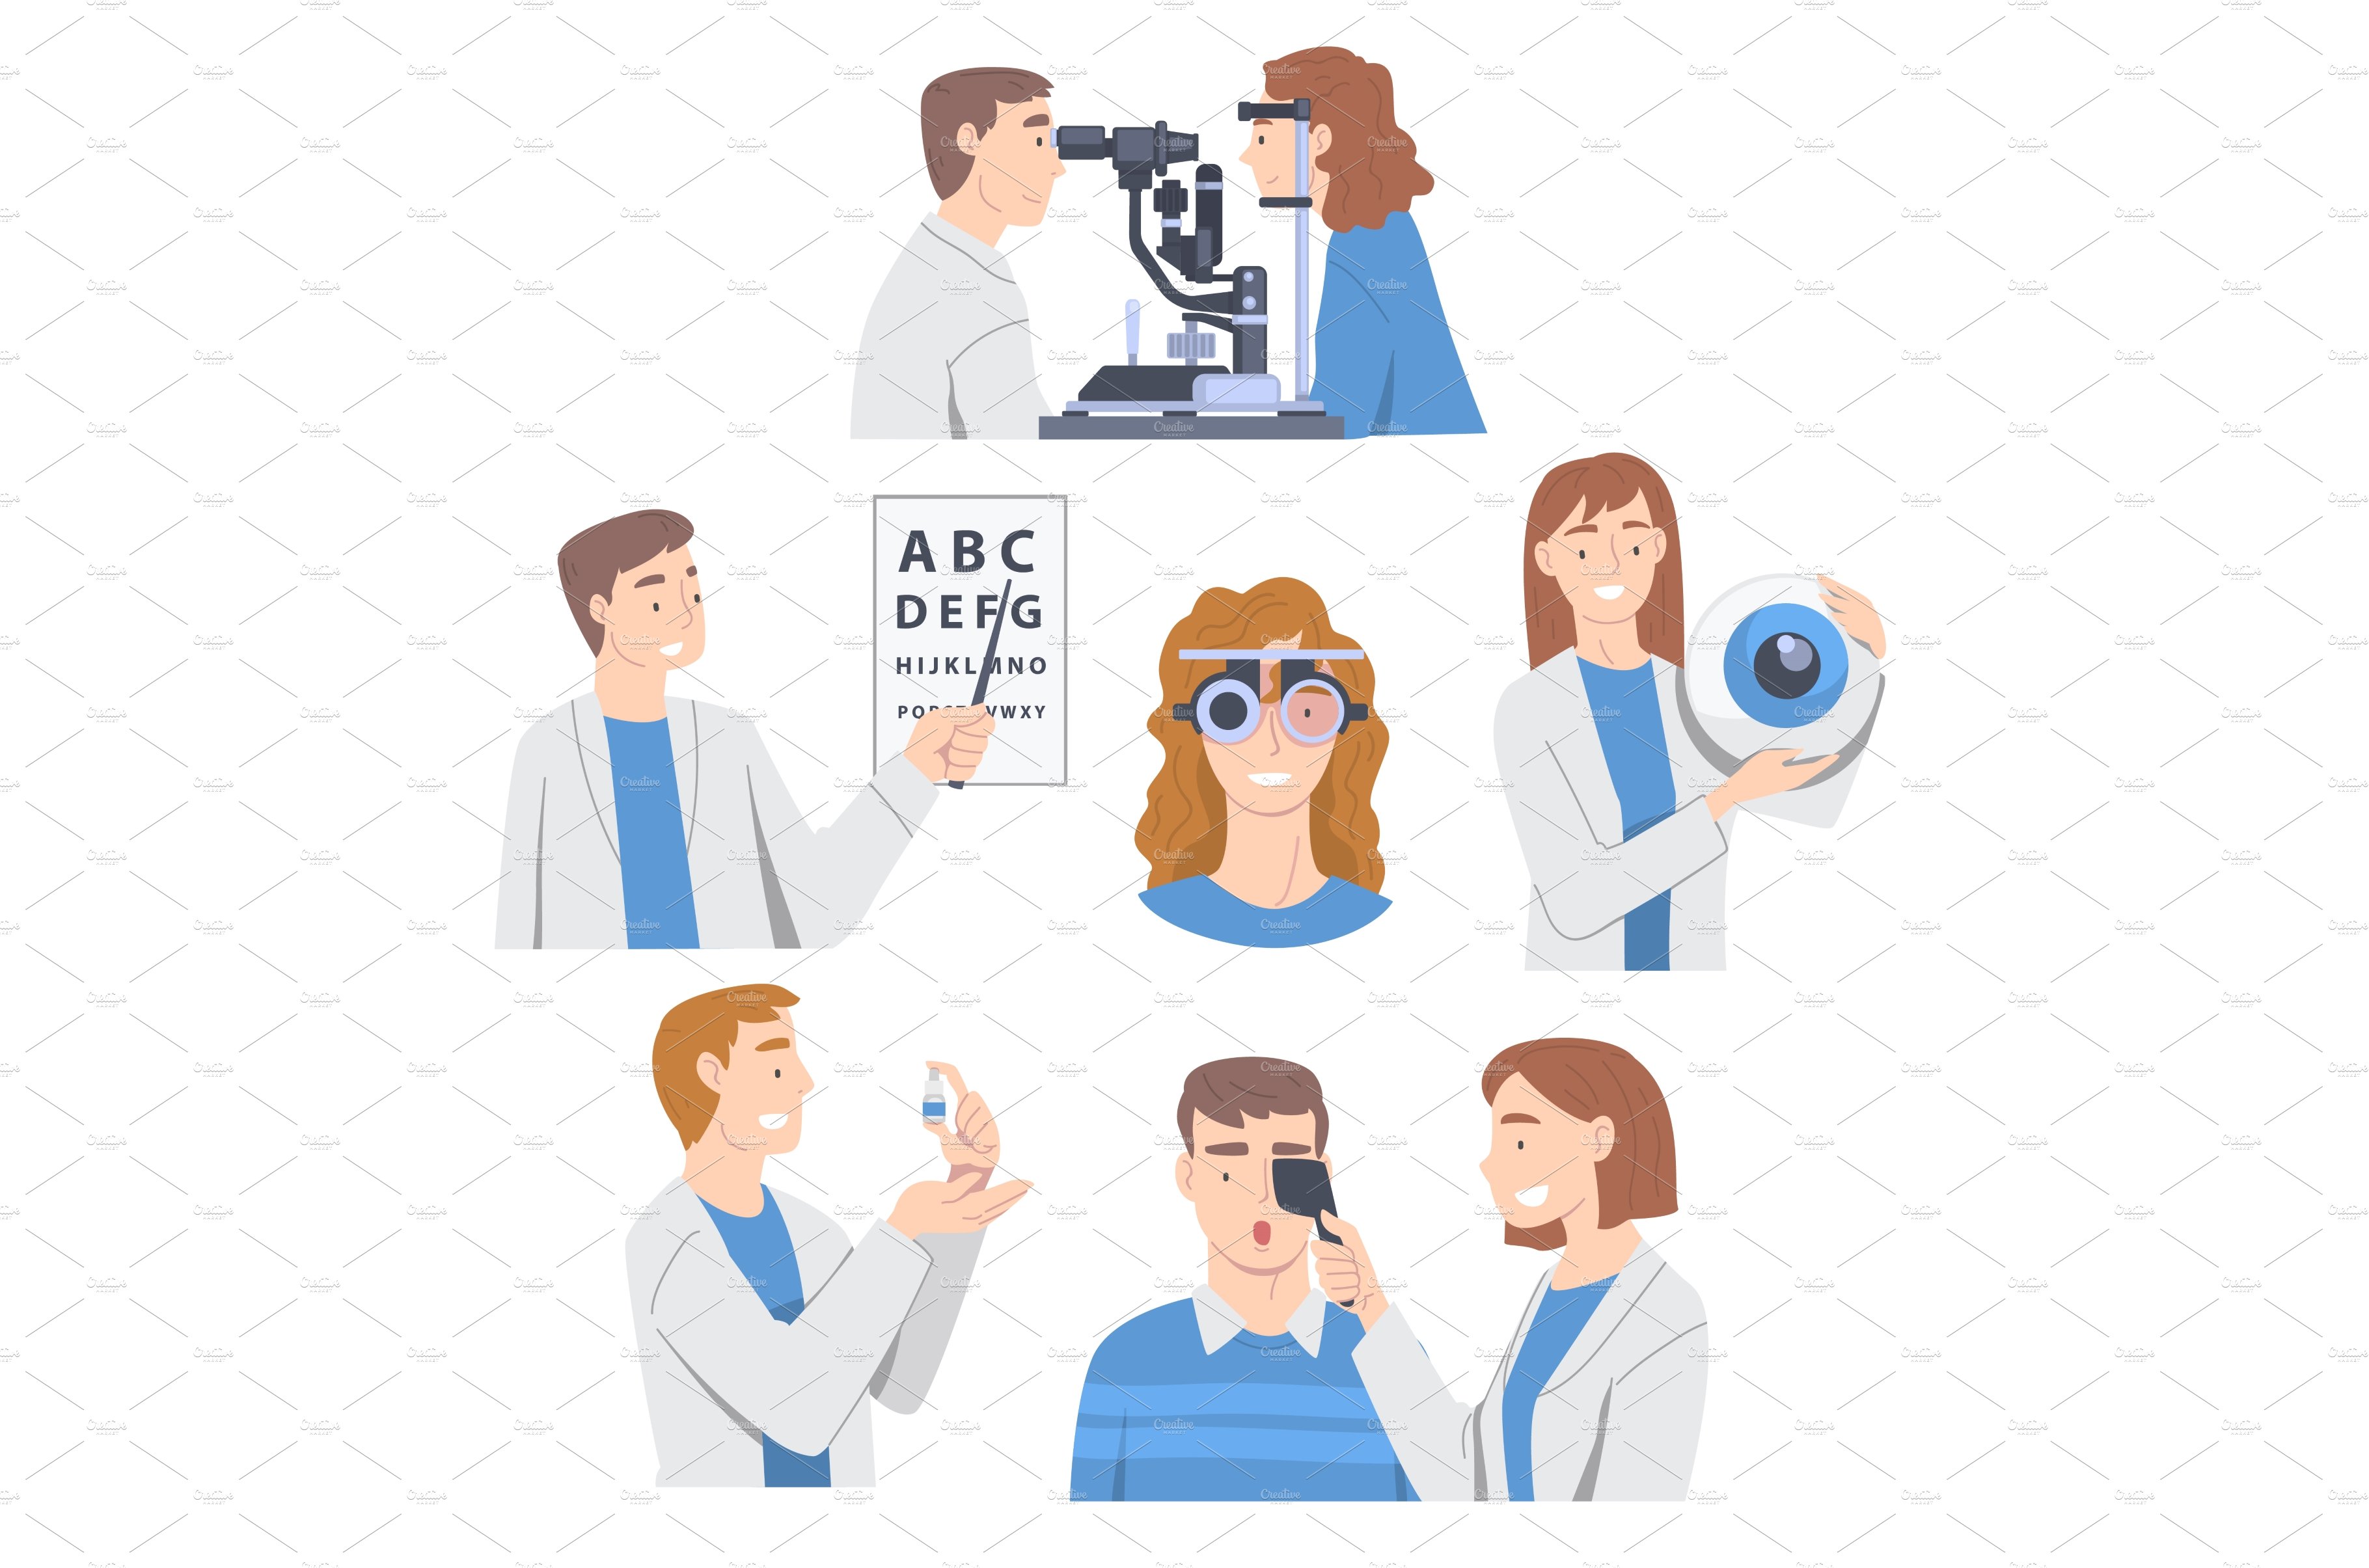 Ophthalmology with Health Care cover image.